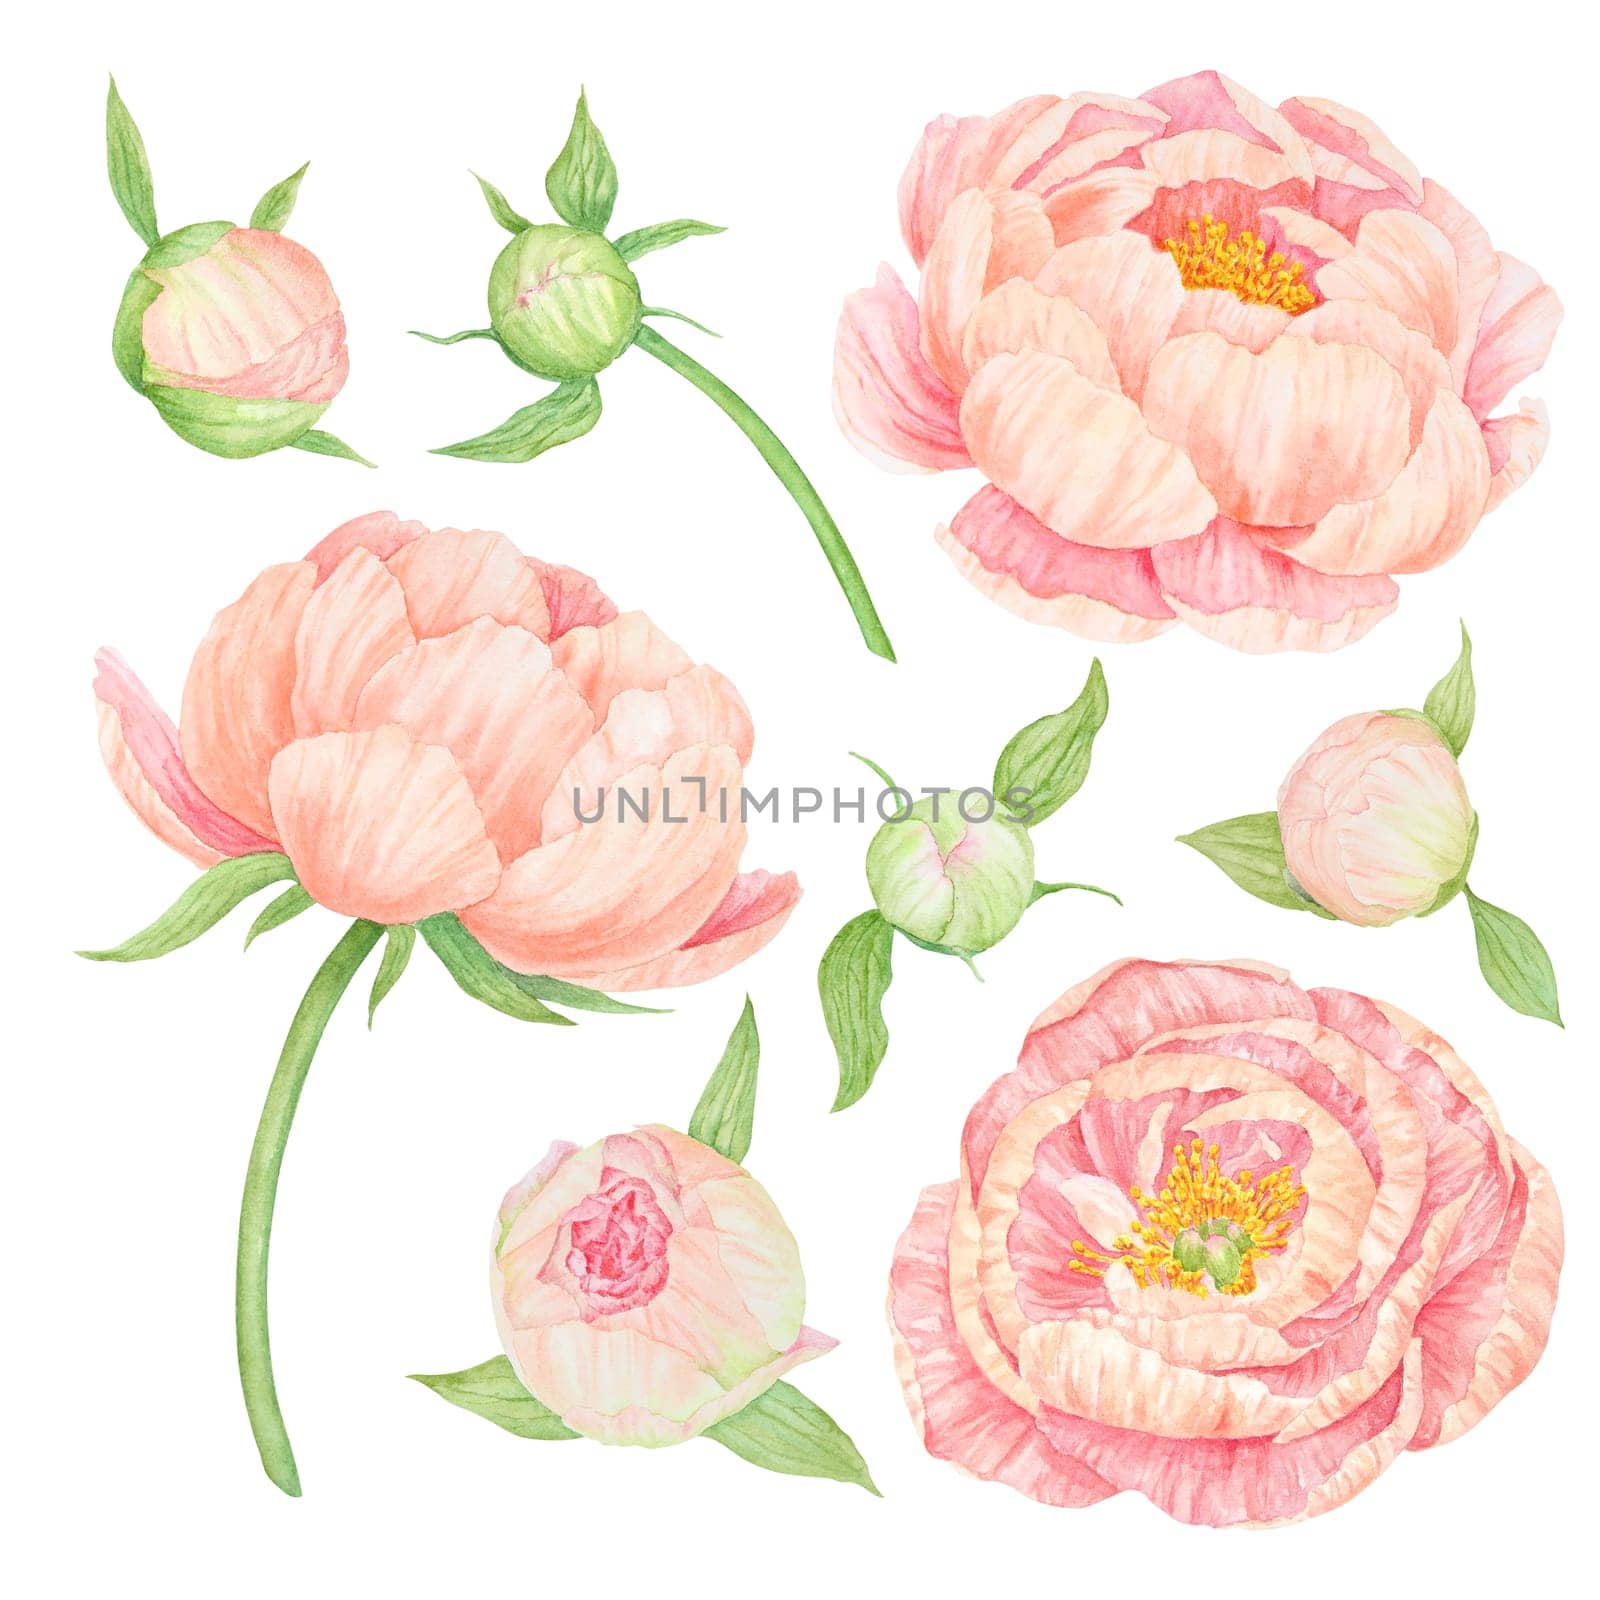 Big set of peach peony watercolor hand drawn painting. Realistic flower clipart, floral arrangement. Chinese national symbol illustration. Perfect for card design, wedding invitation, prints, textile by florainlove_art